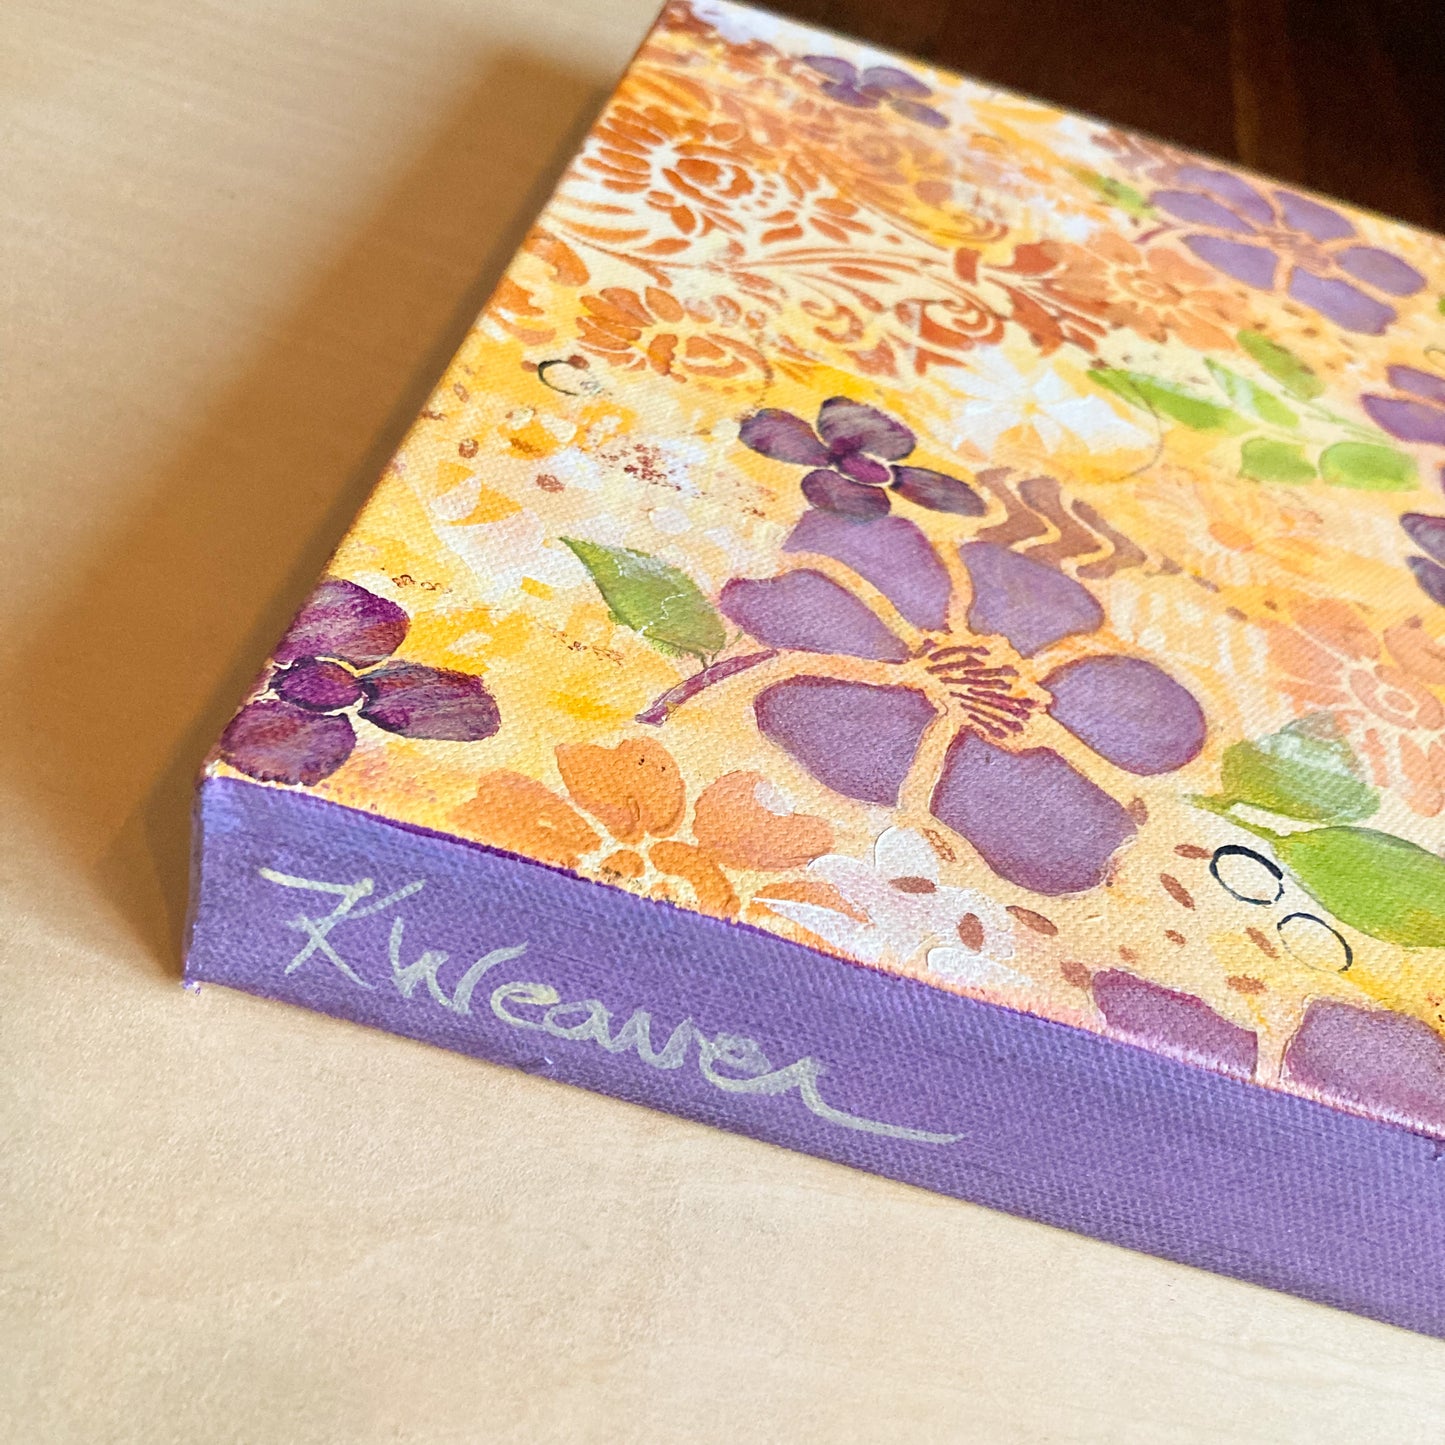 side view floral Hawaiian theme acrylic painting on canvas purple flowers orange flowers green leaves circles and scrolling shapes warm and cheerful sides painted purple